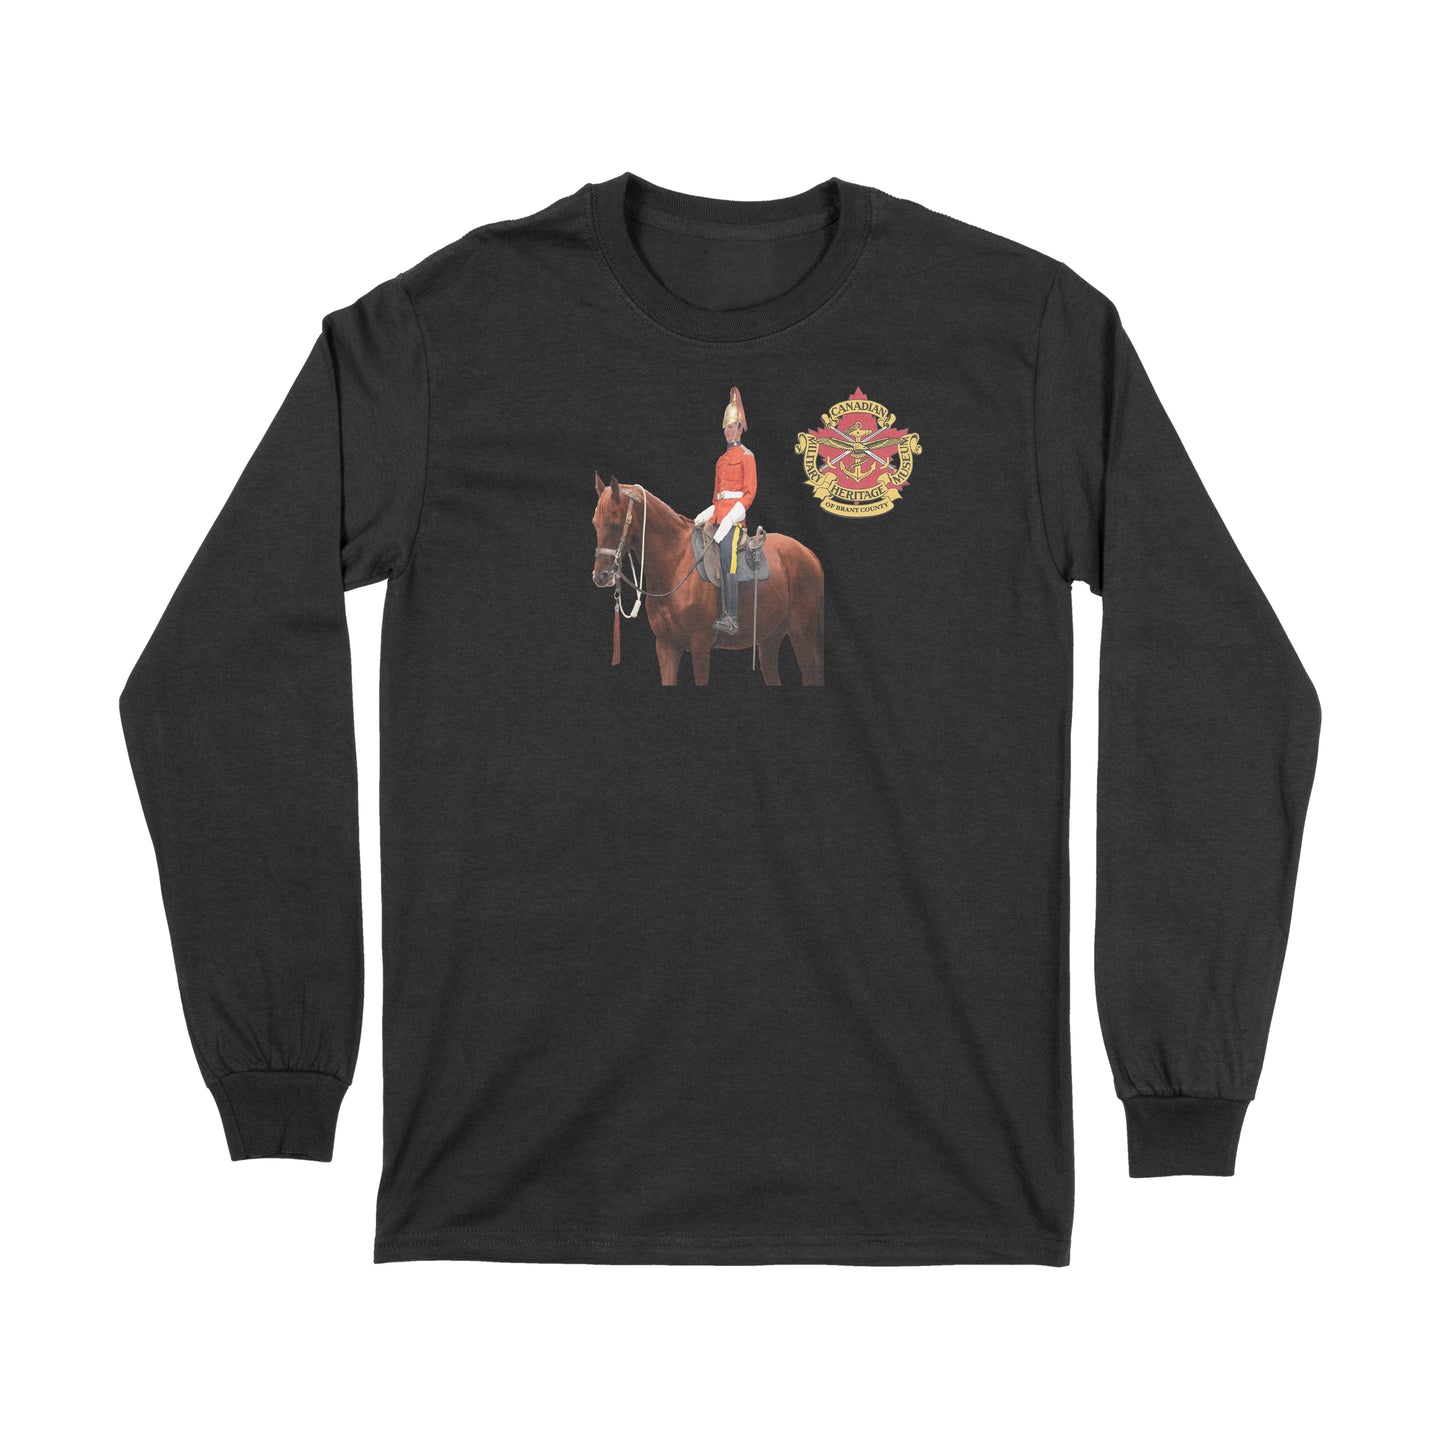 Brantford, Canadian Military Heritage Museum, Fat Dave, Long Sleeve, Mounted Dragoon, Museum, Black